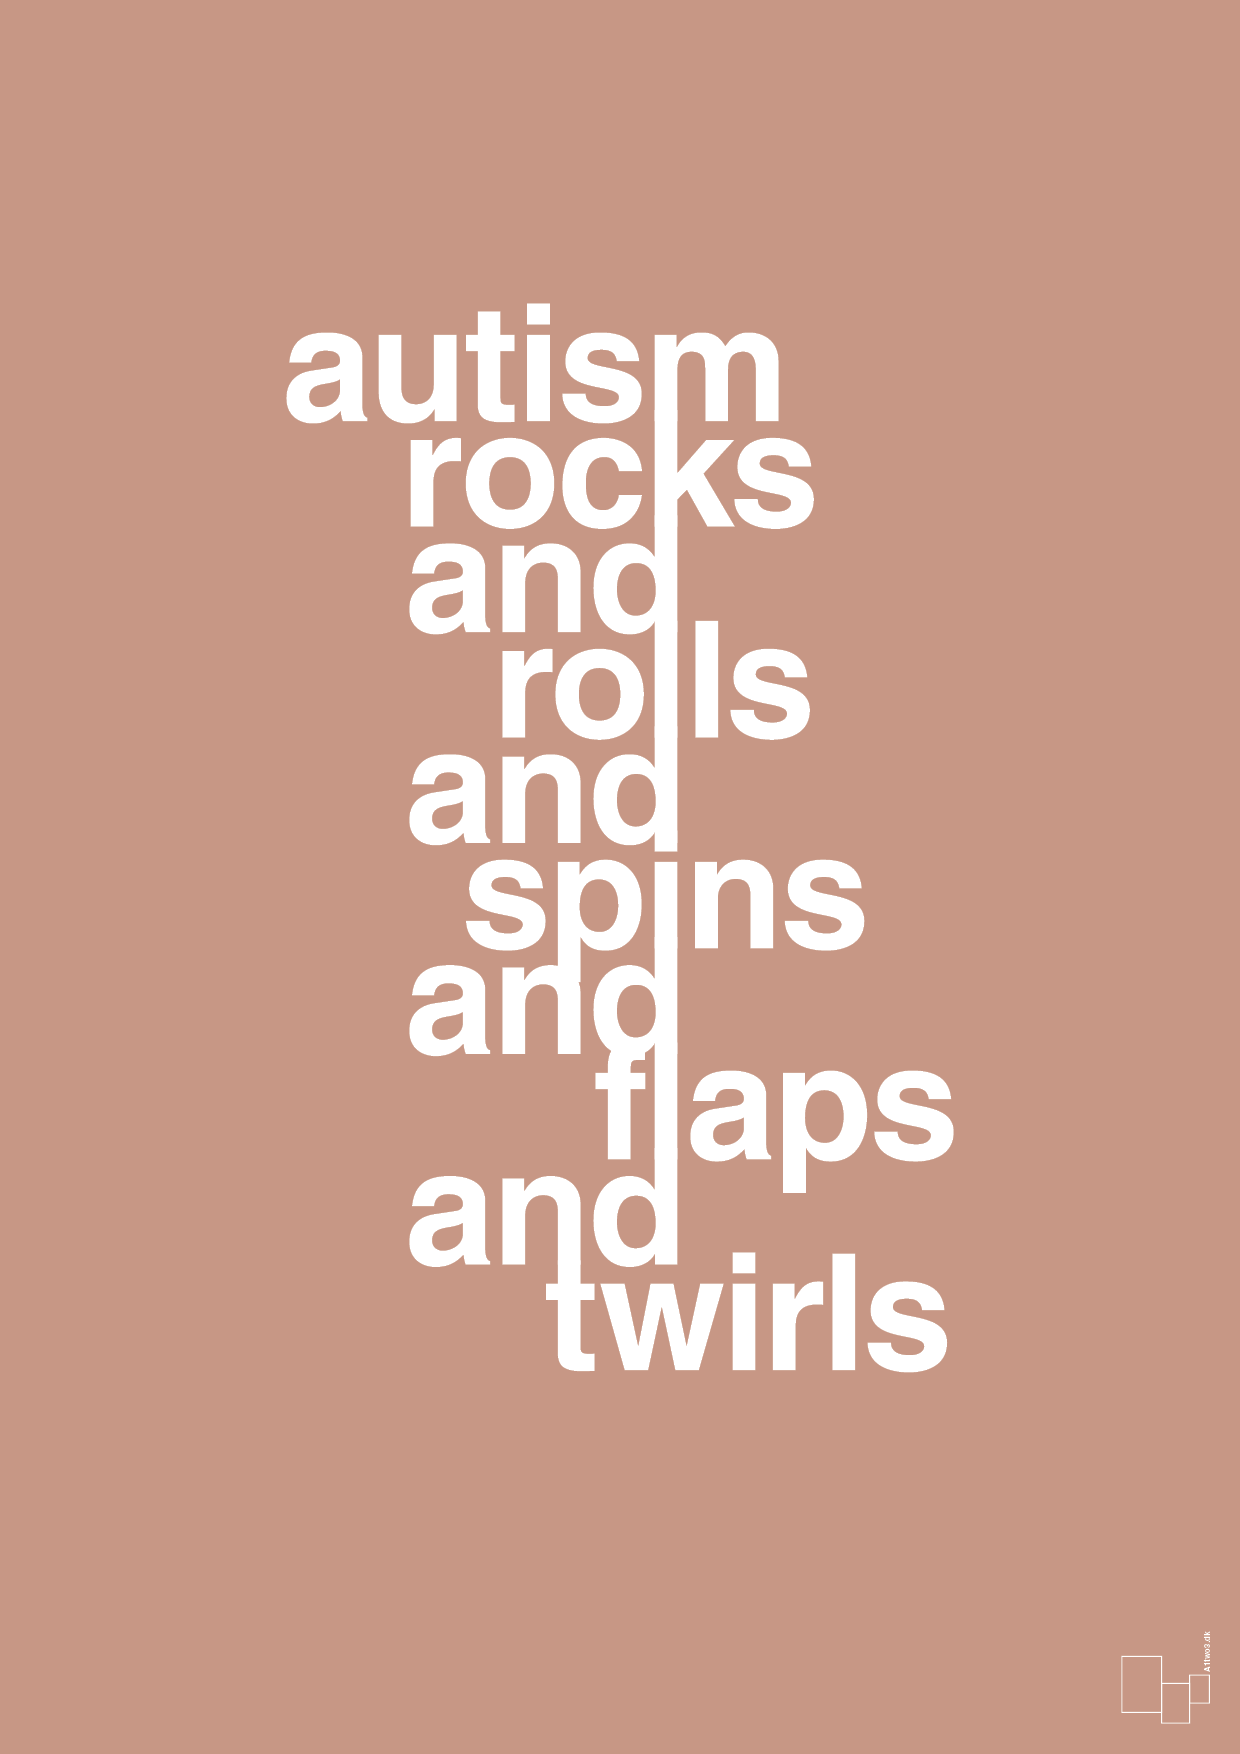 autism rocks and rolls and spins and flaps and twirls - Plakat med Samfund i Powder